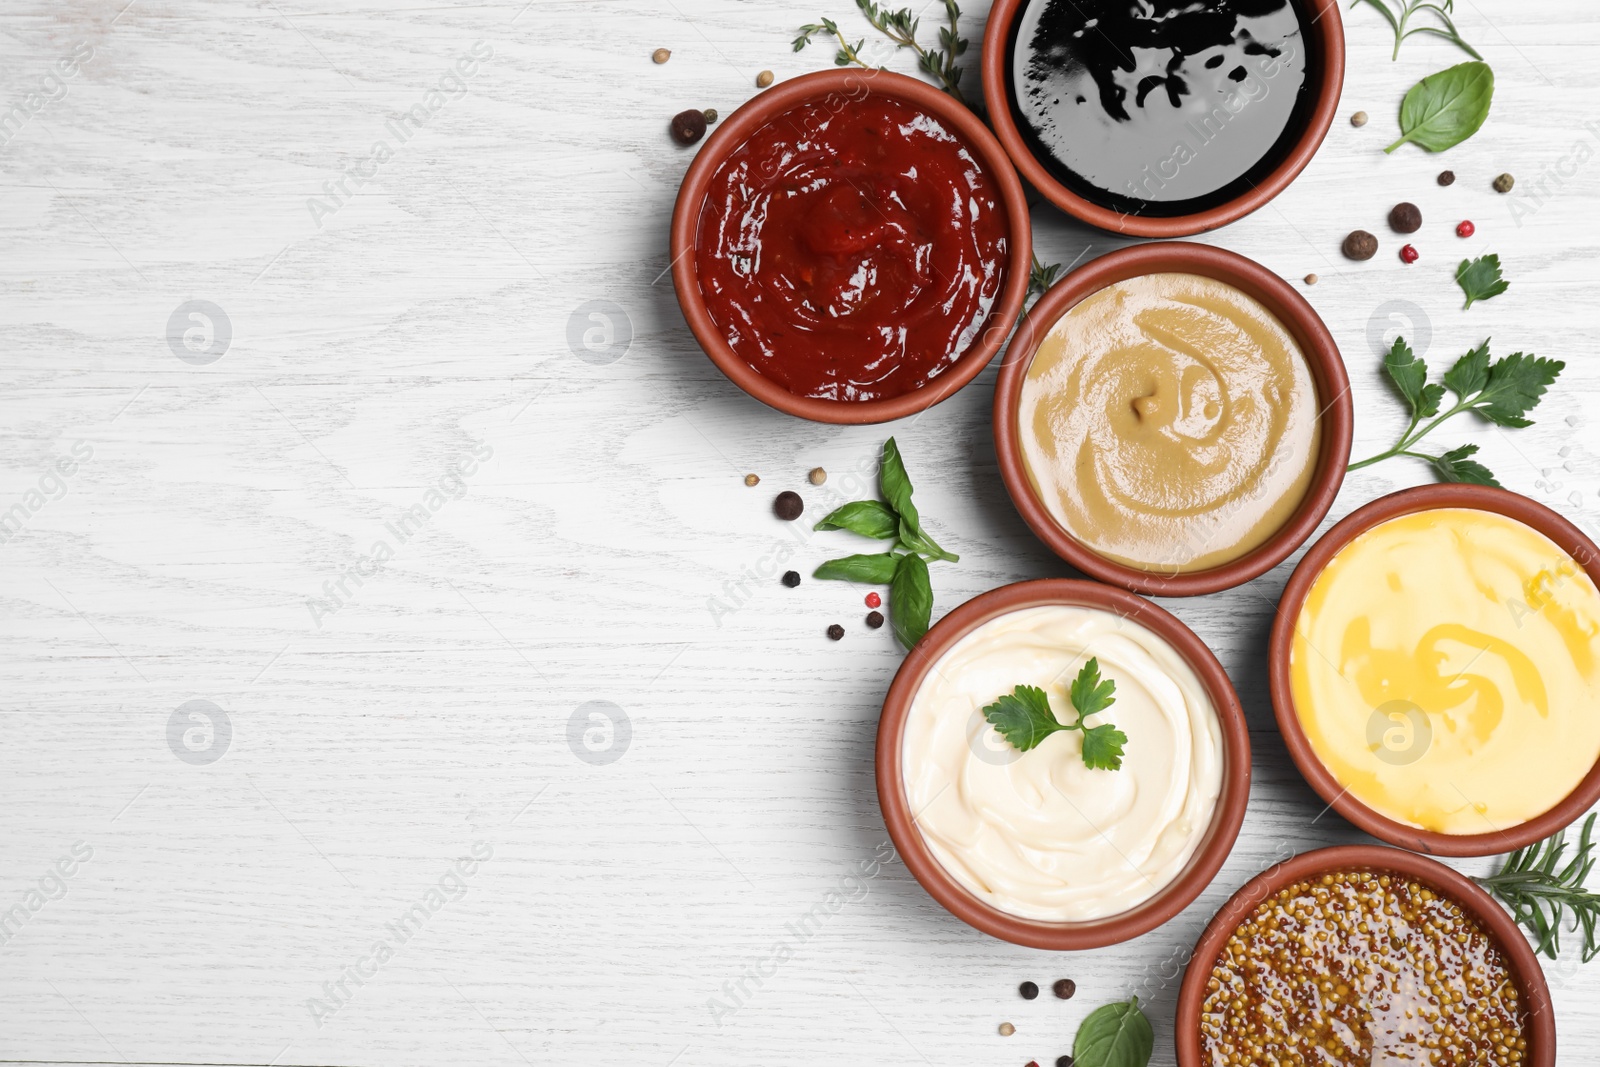 Photo of Many different sauces and herbs on white wooden table, flat lay. Space for text